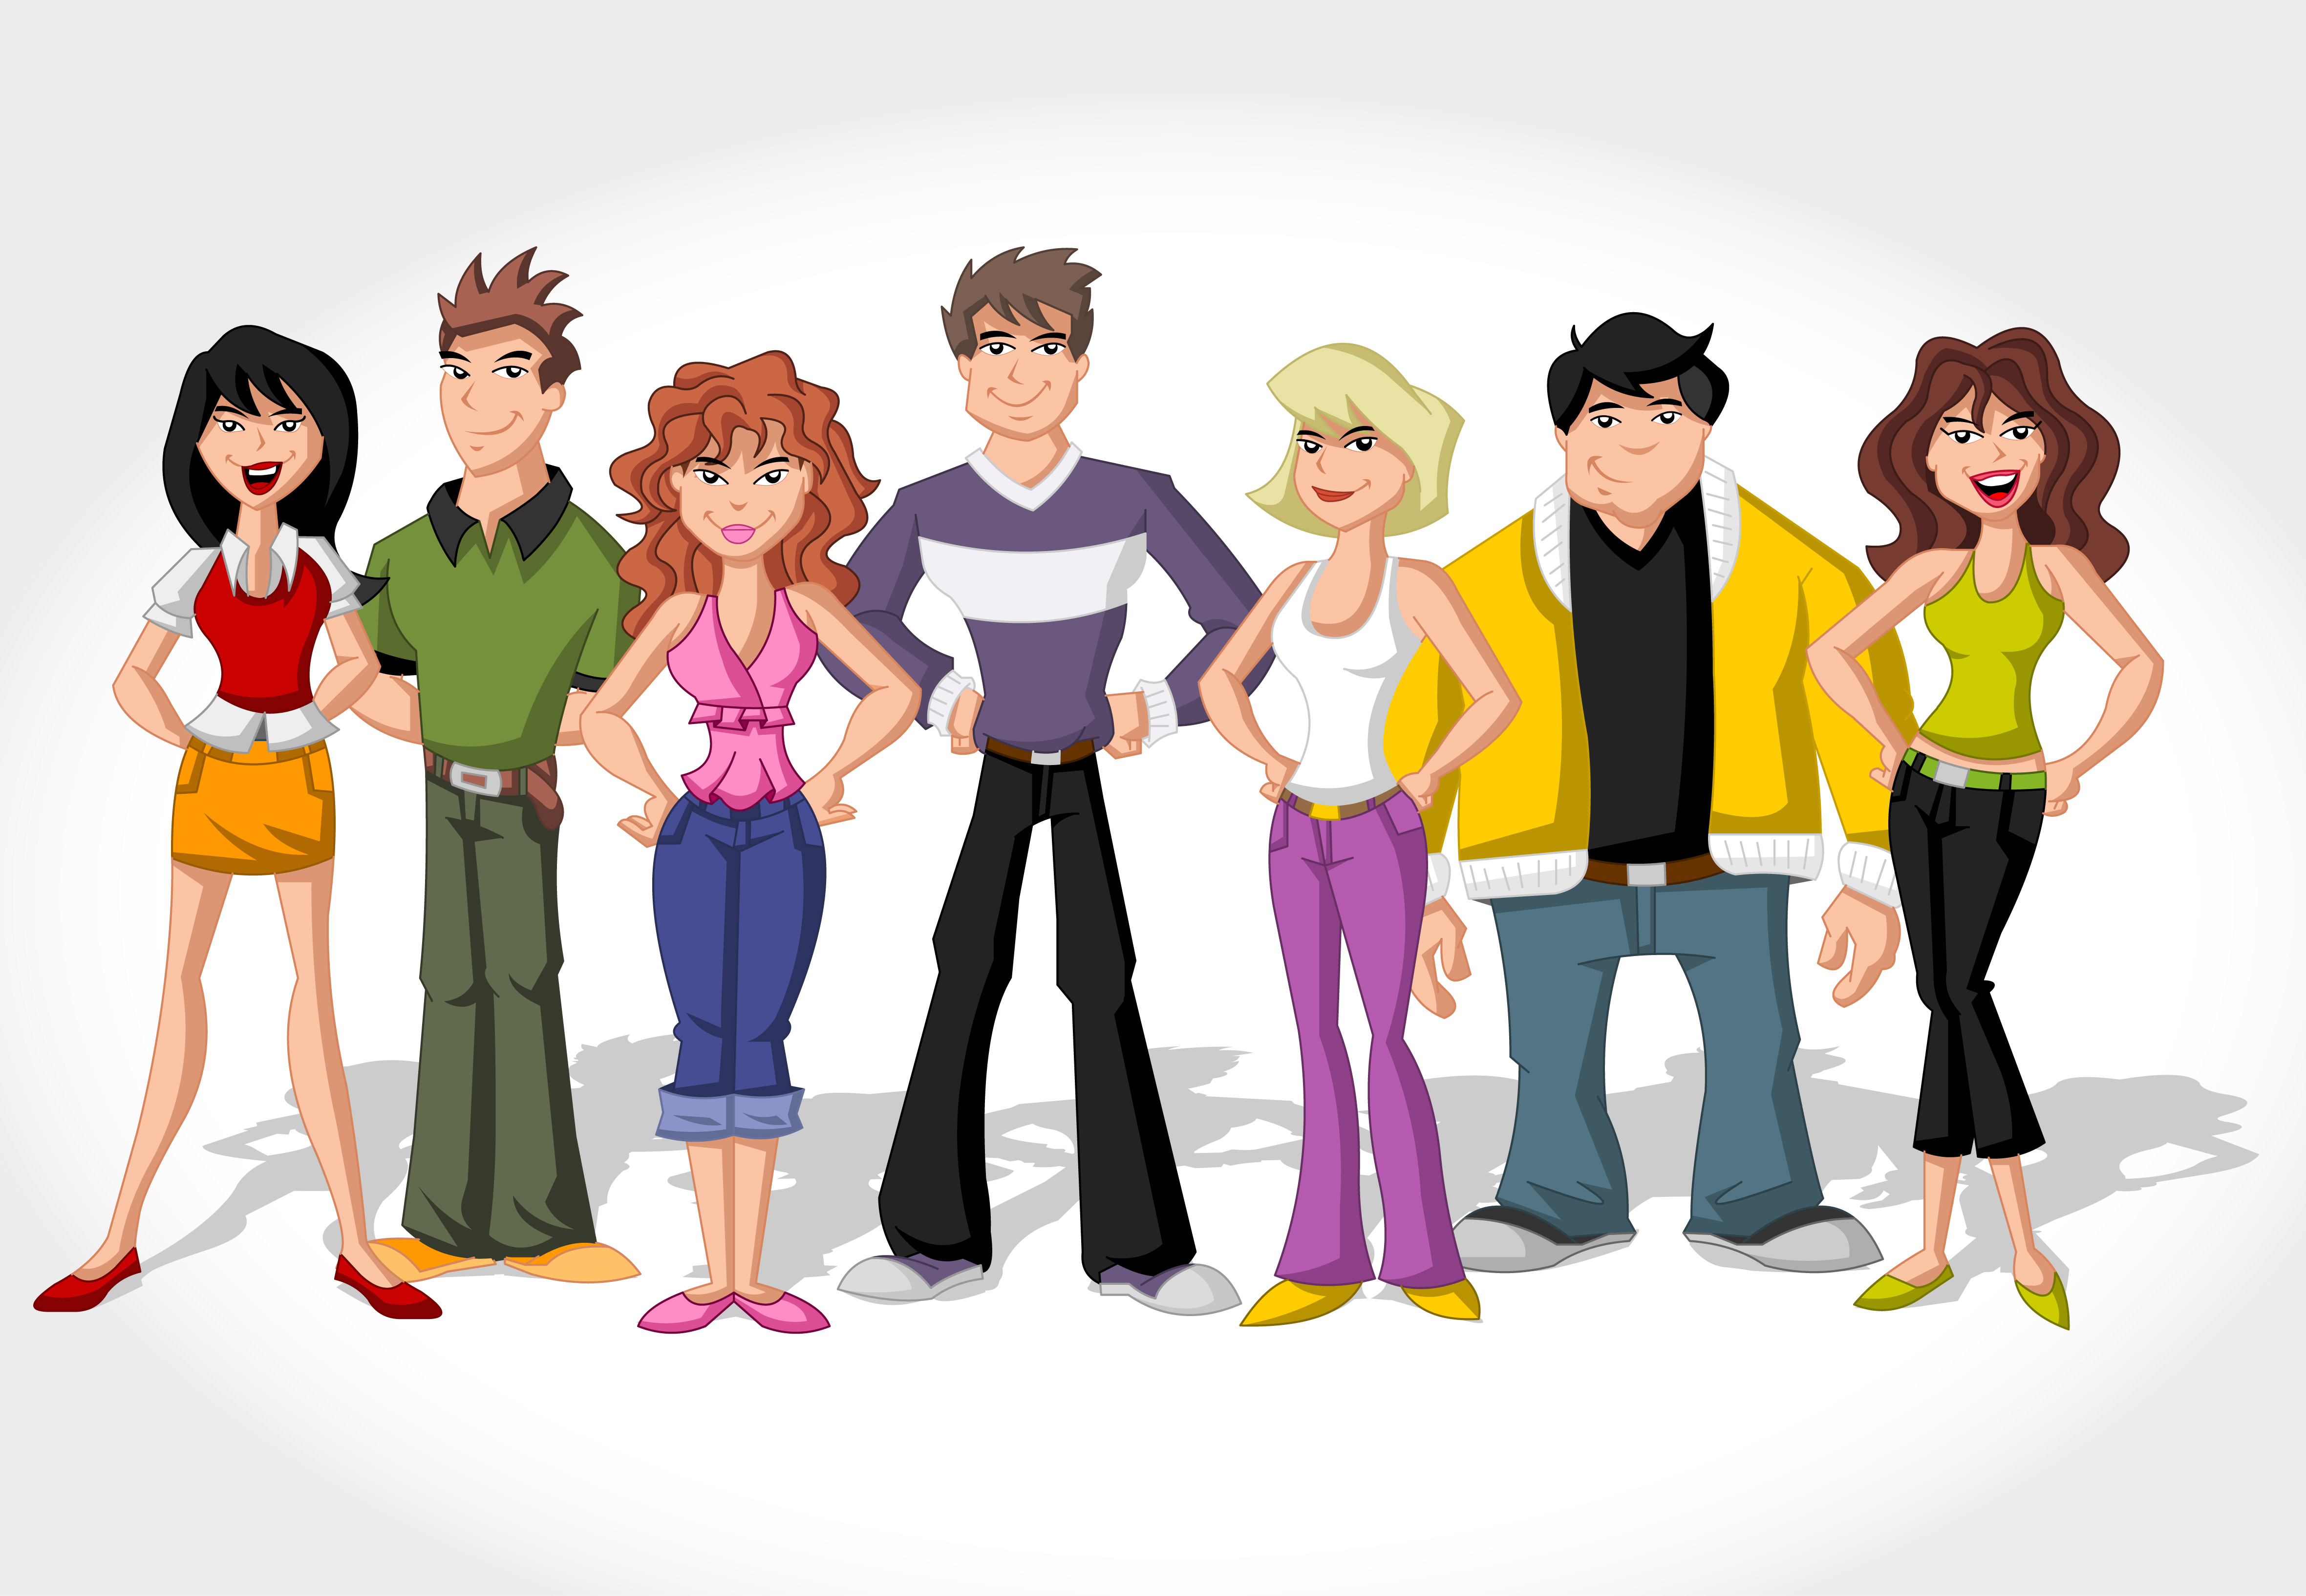 Free Images Cartoon Characters - ClipArt Best